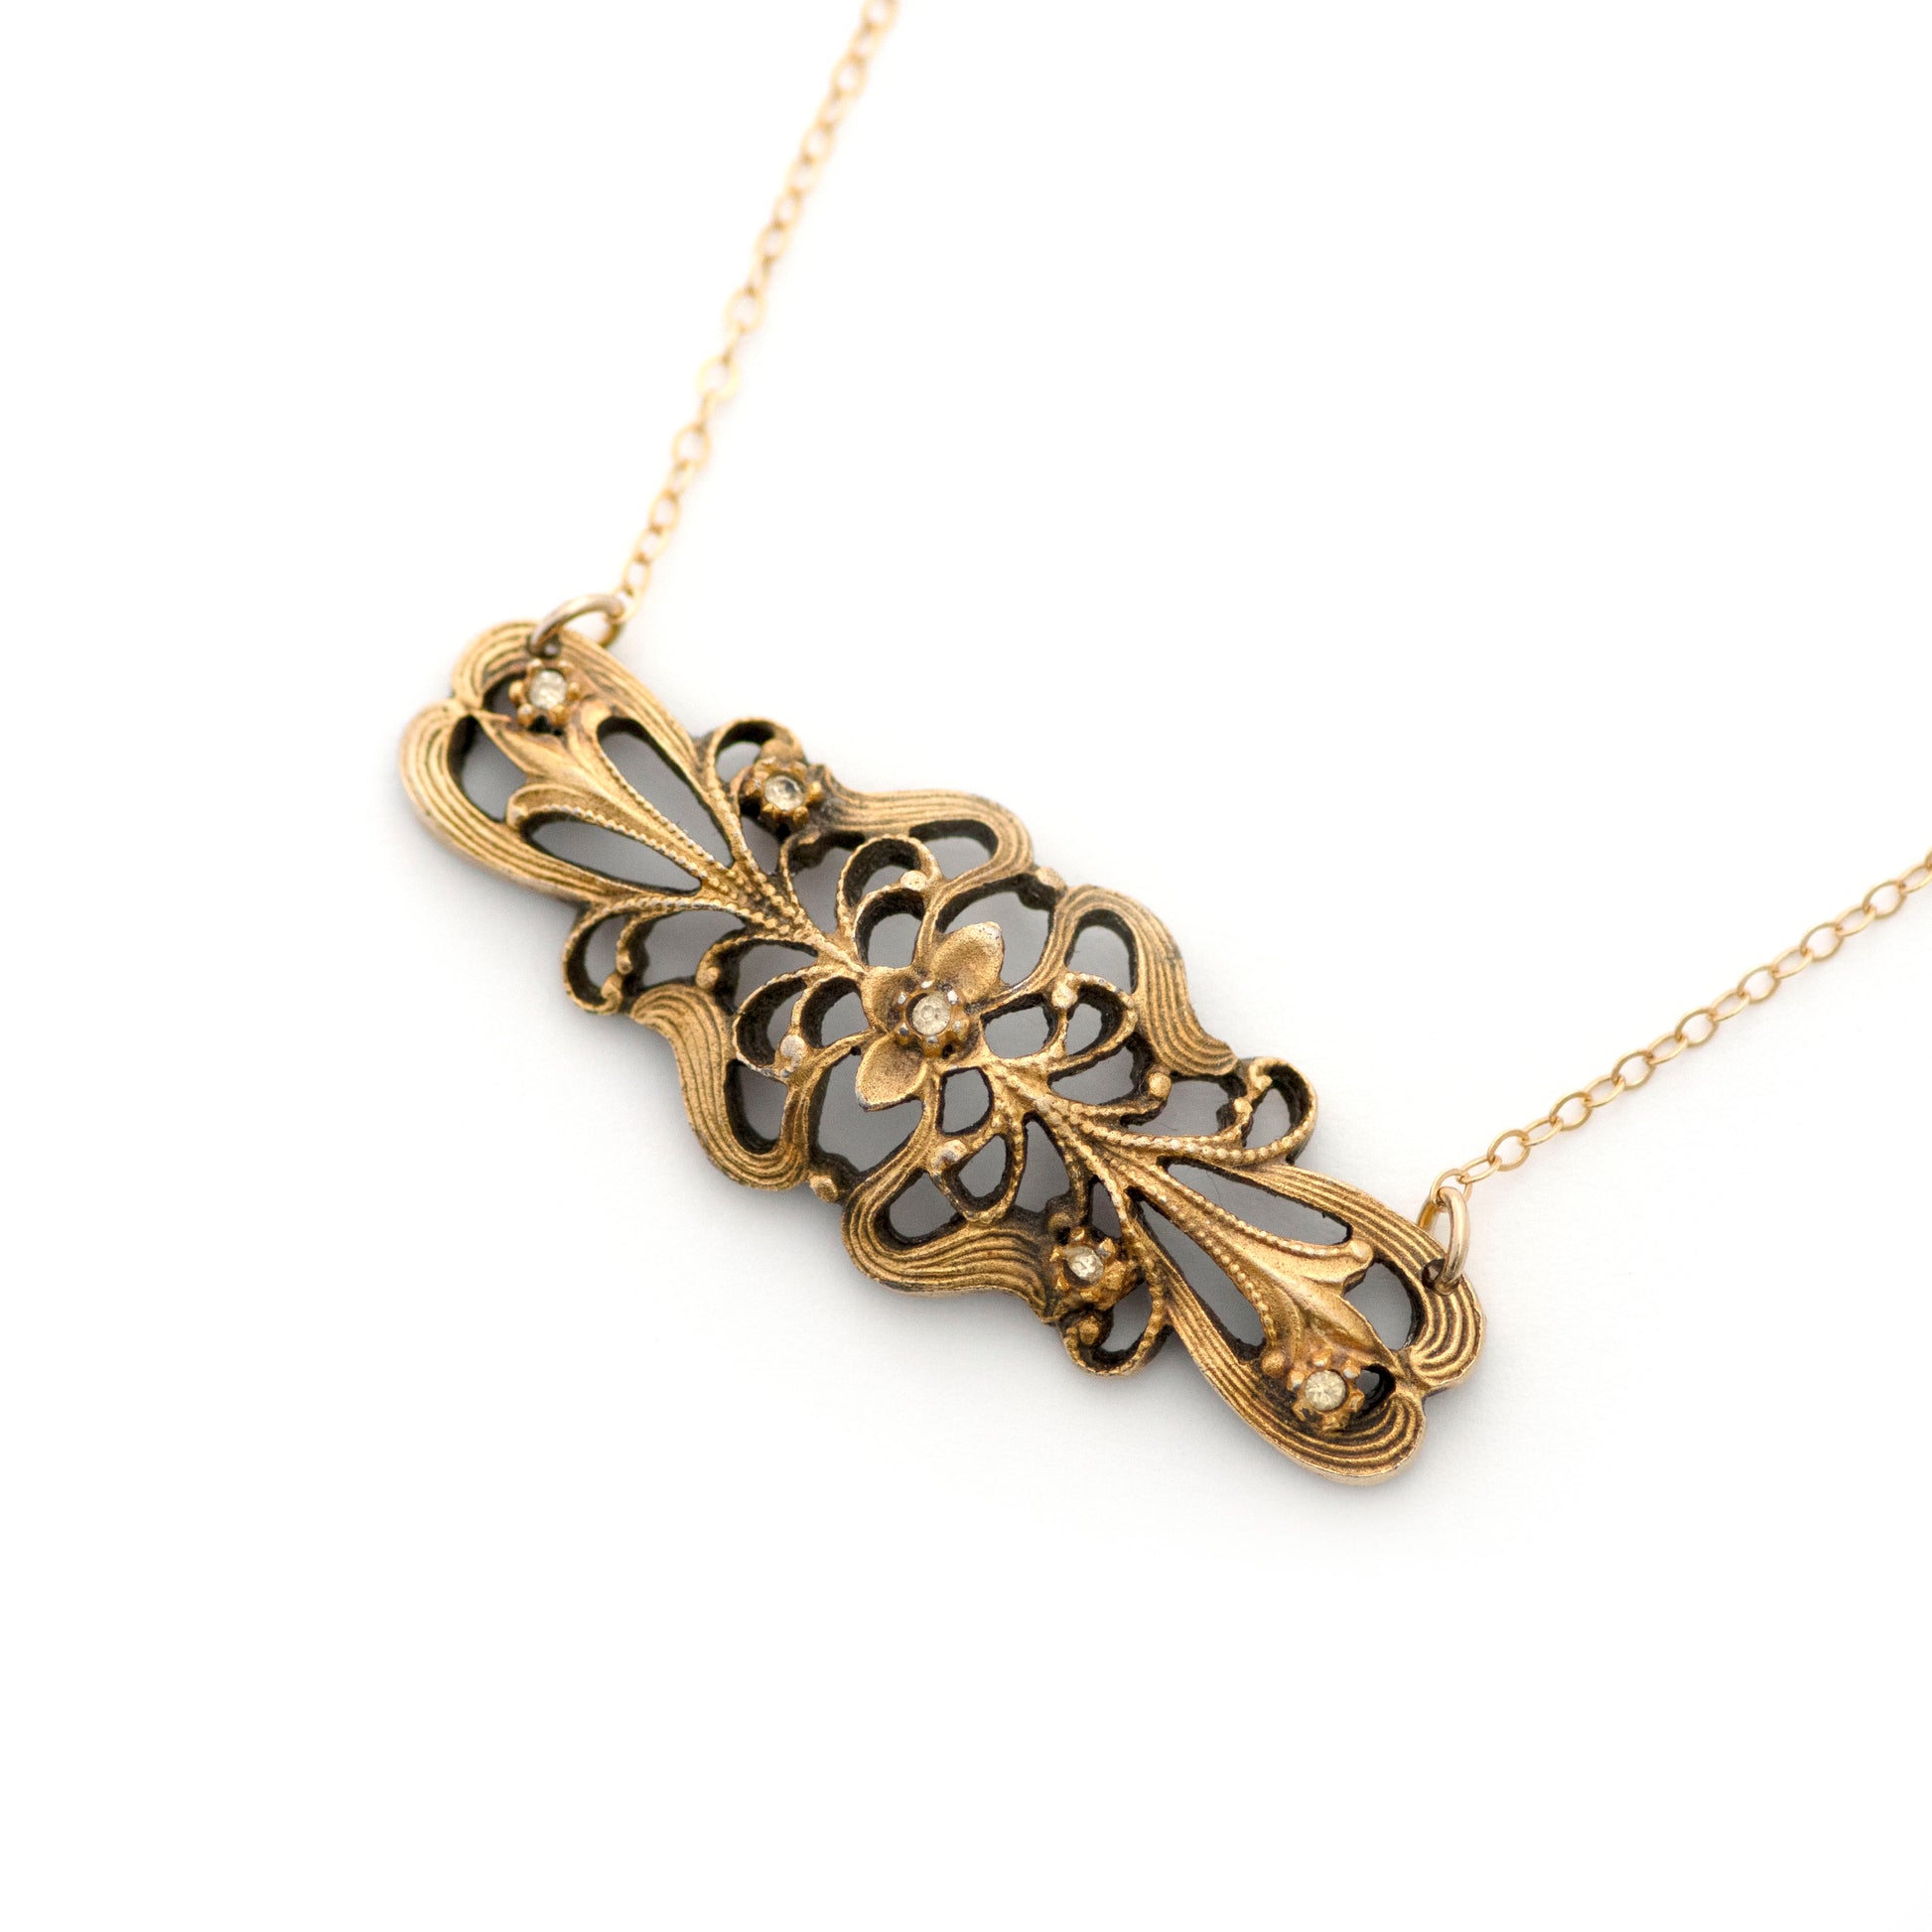 A product photography image of a vintage bar pin repurposed pendant dangling on a 14k gold filled cable chain on a white background. Pendant has a scrolling floral swirls in the style of Art Nouveau era design and is studded with 5 clear paste rhinestones.